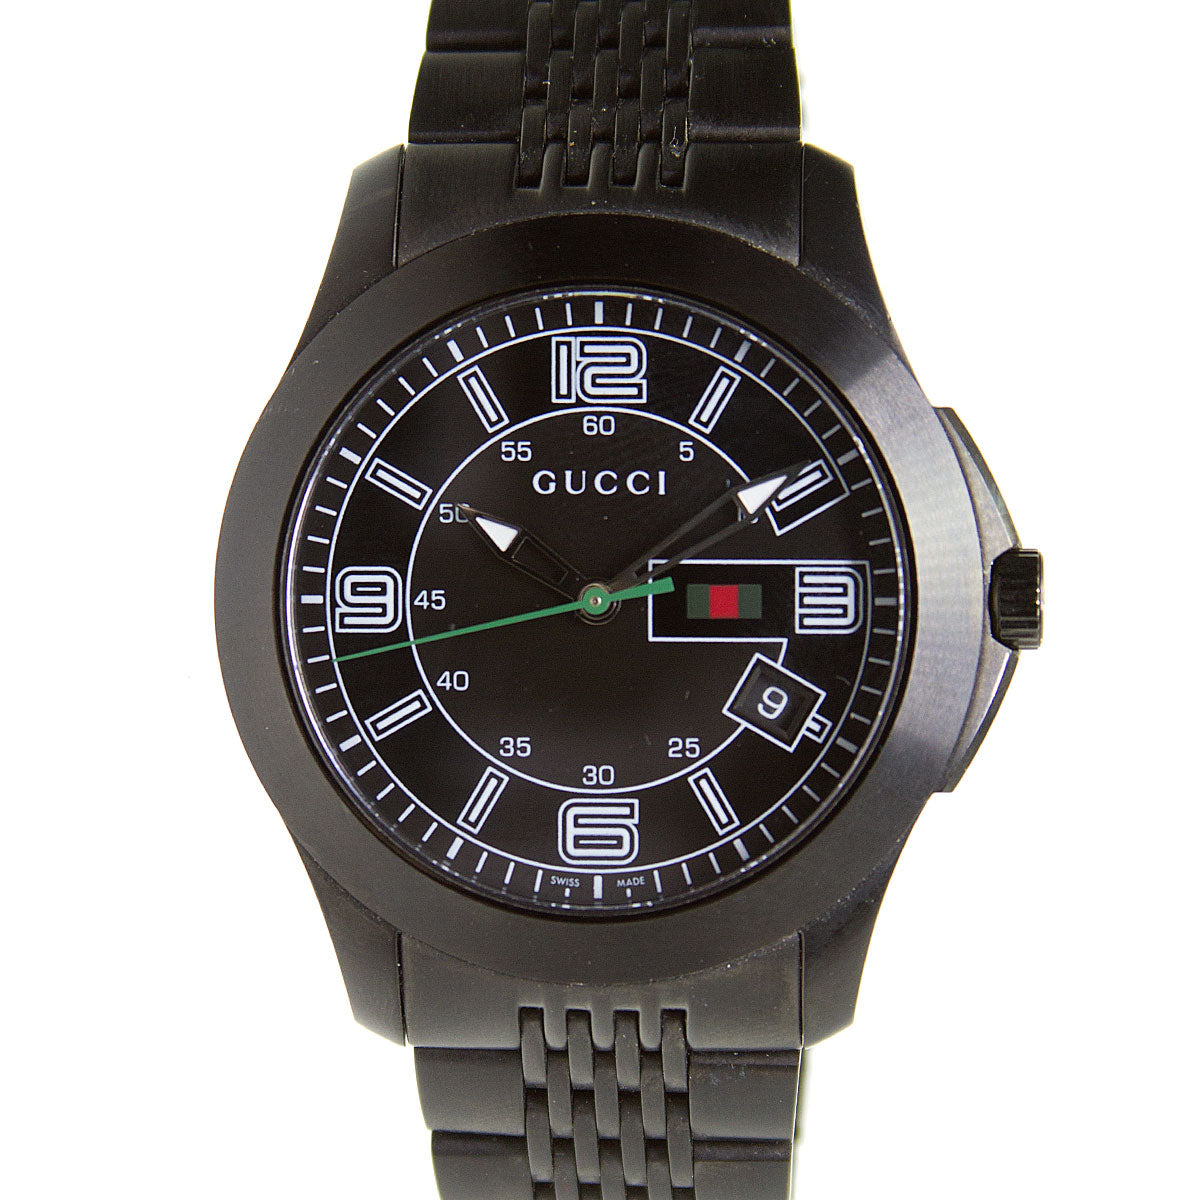 Bedøvelsesmiddel camouflage Skulptur Gucci G-Timeless 126.2 Black PVD Watch – Chicago Pawners & Jewelers